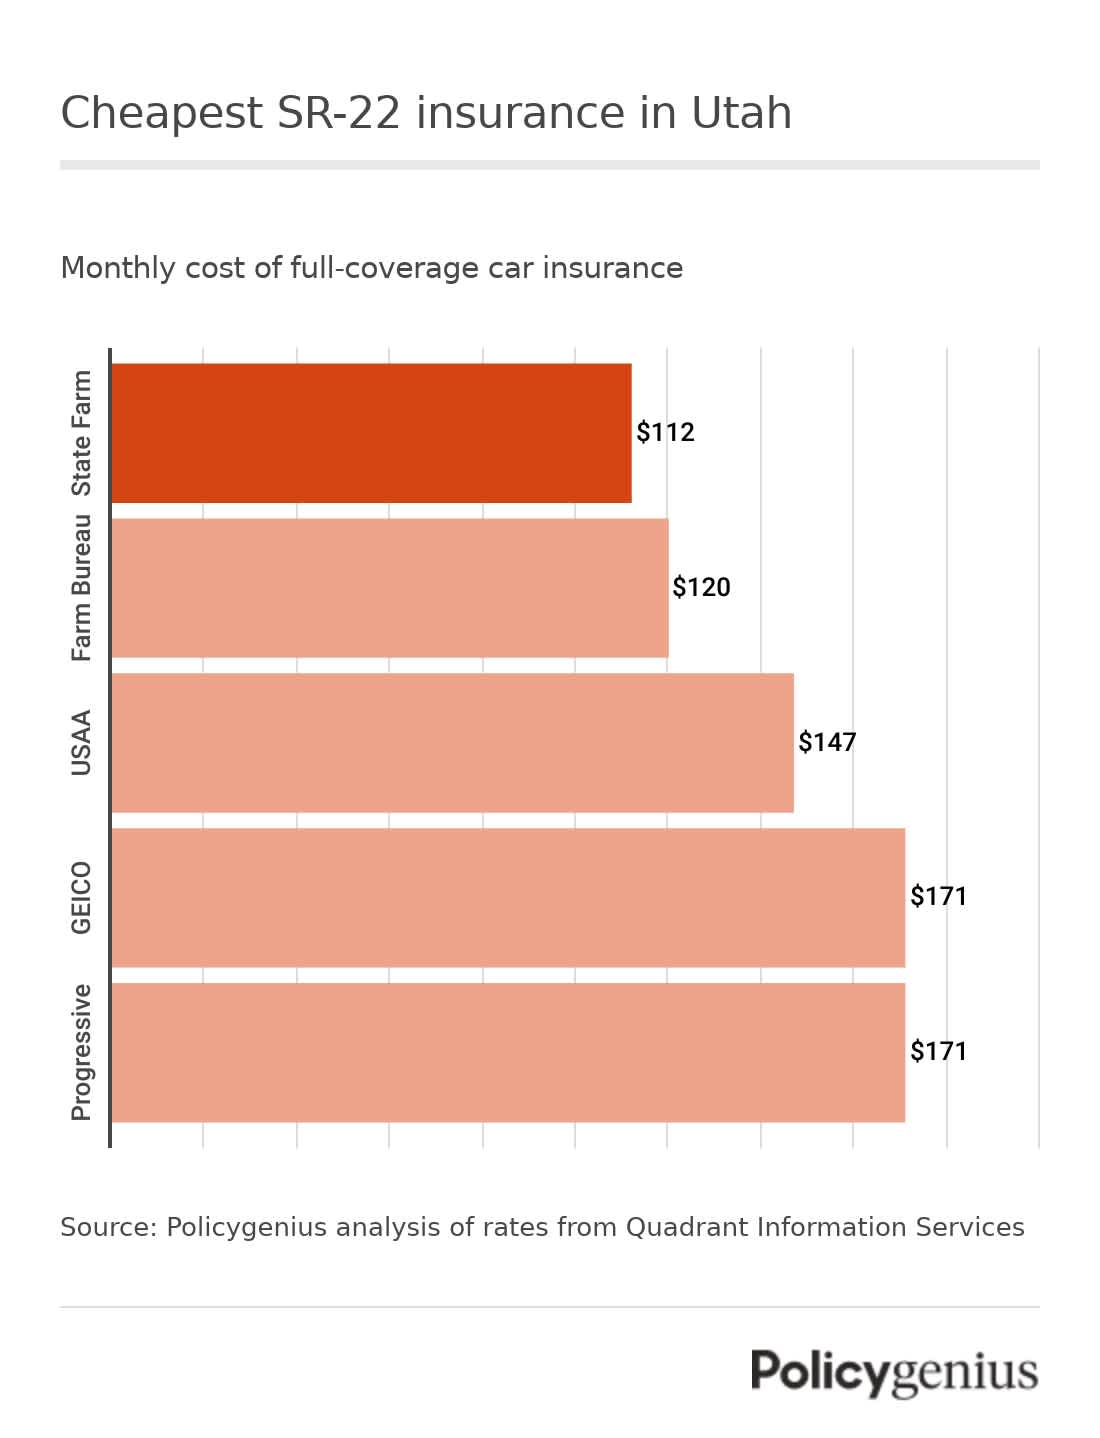 A bar graph showing the cheapest SR-22 insurance in Utah, with State Farm being the cheapest company.